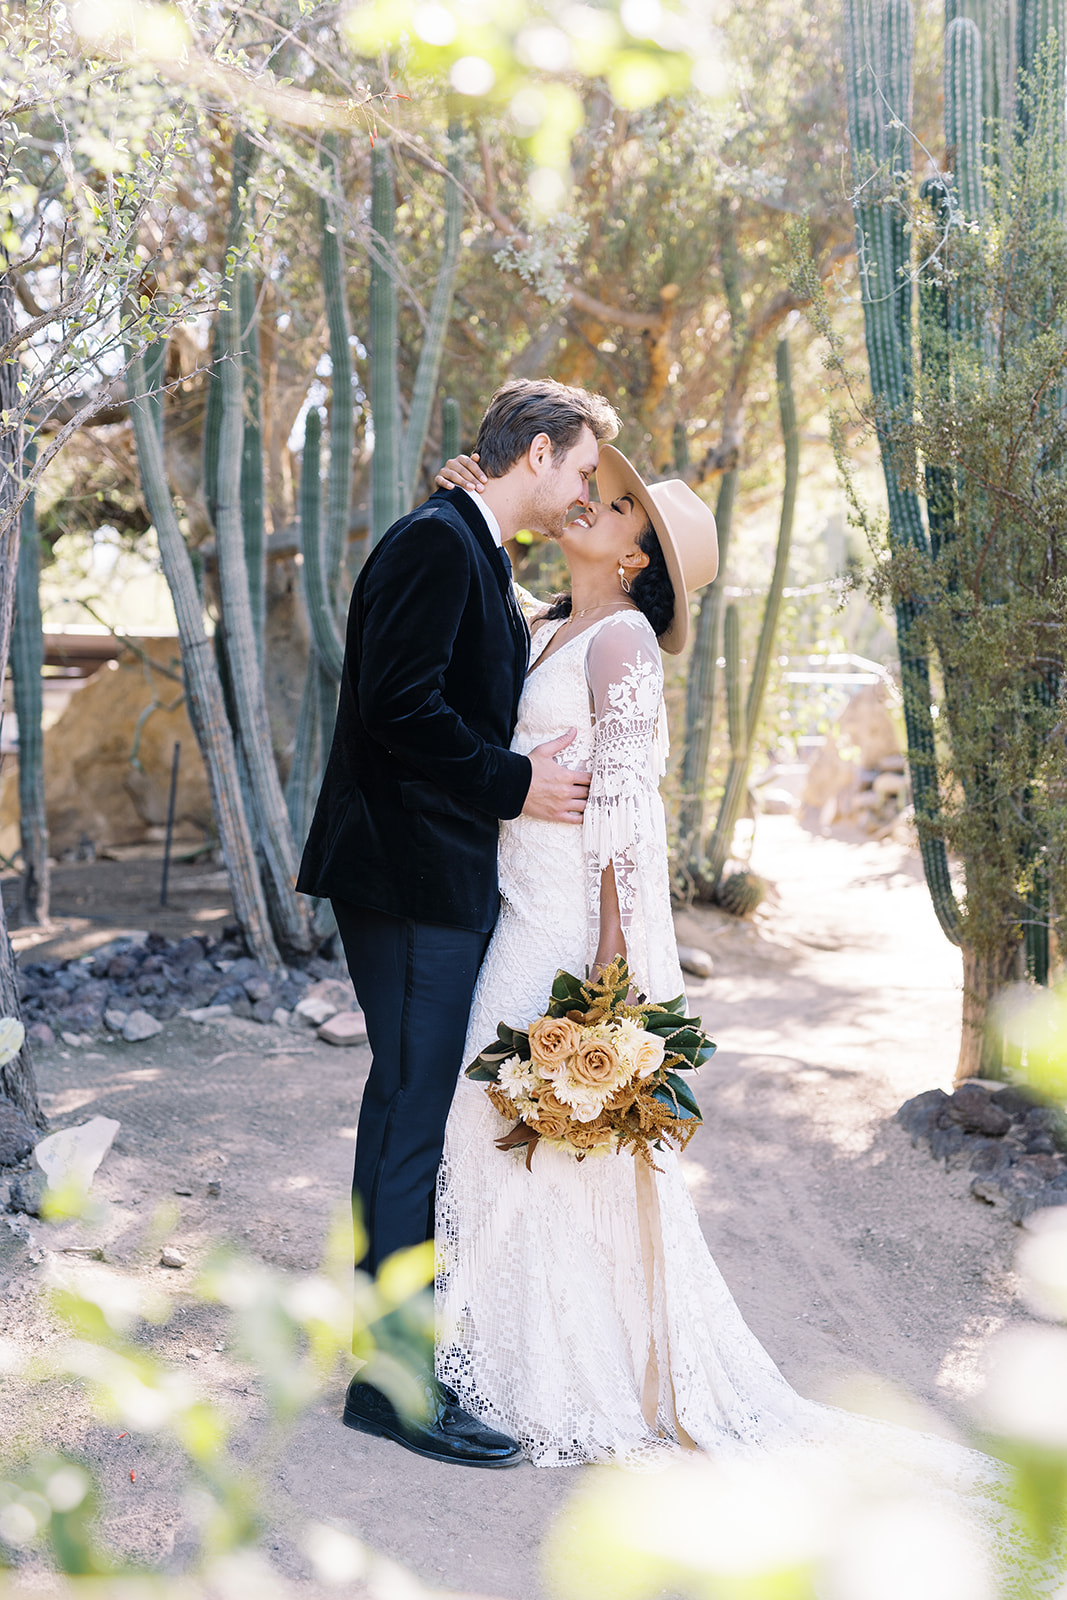 Woman smiling at man while man looks at her while holding her. They are surrounded by desert cactus and are in a private area. Desert elopement planning